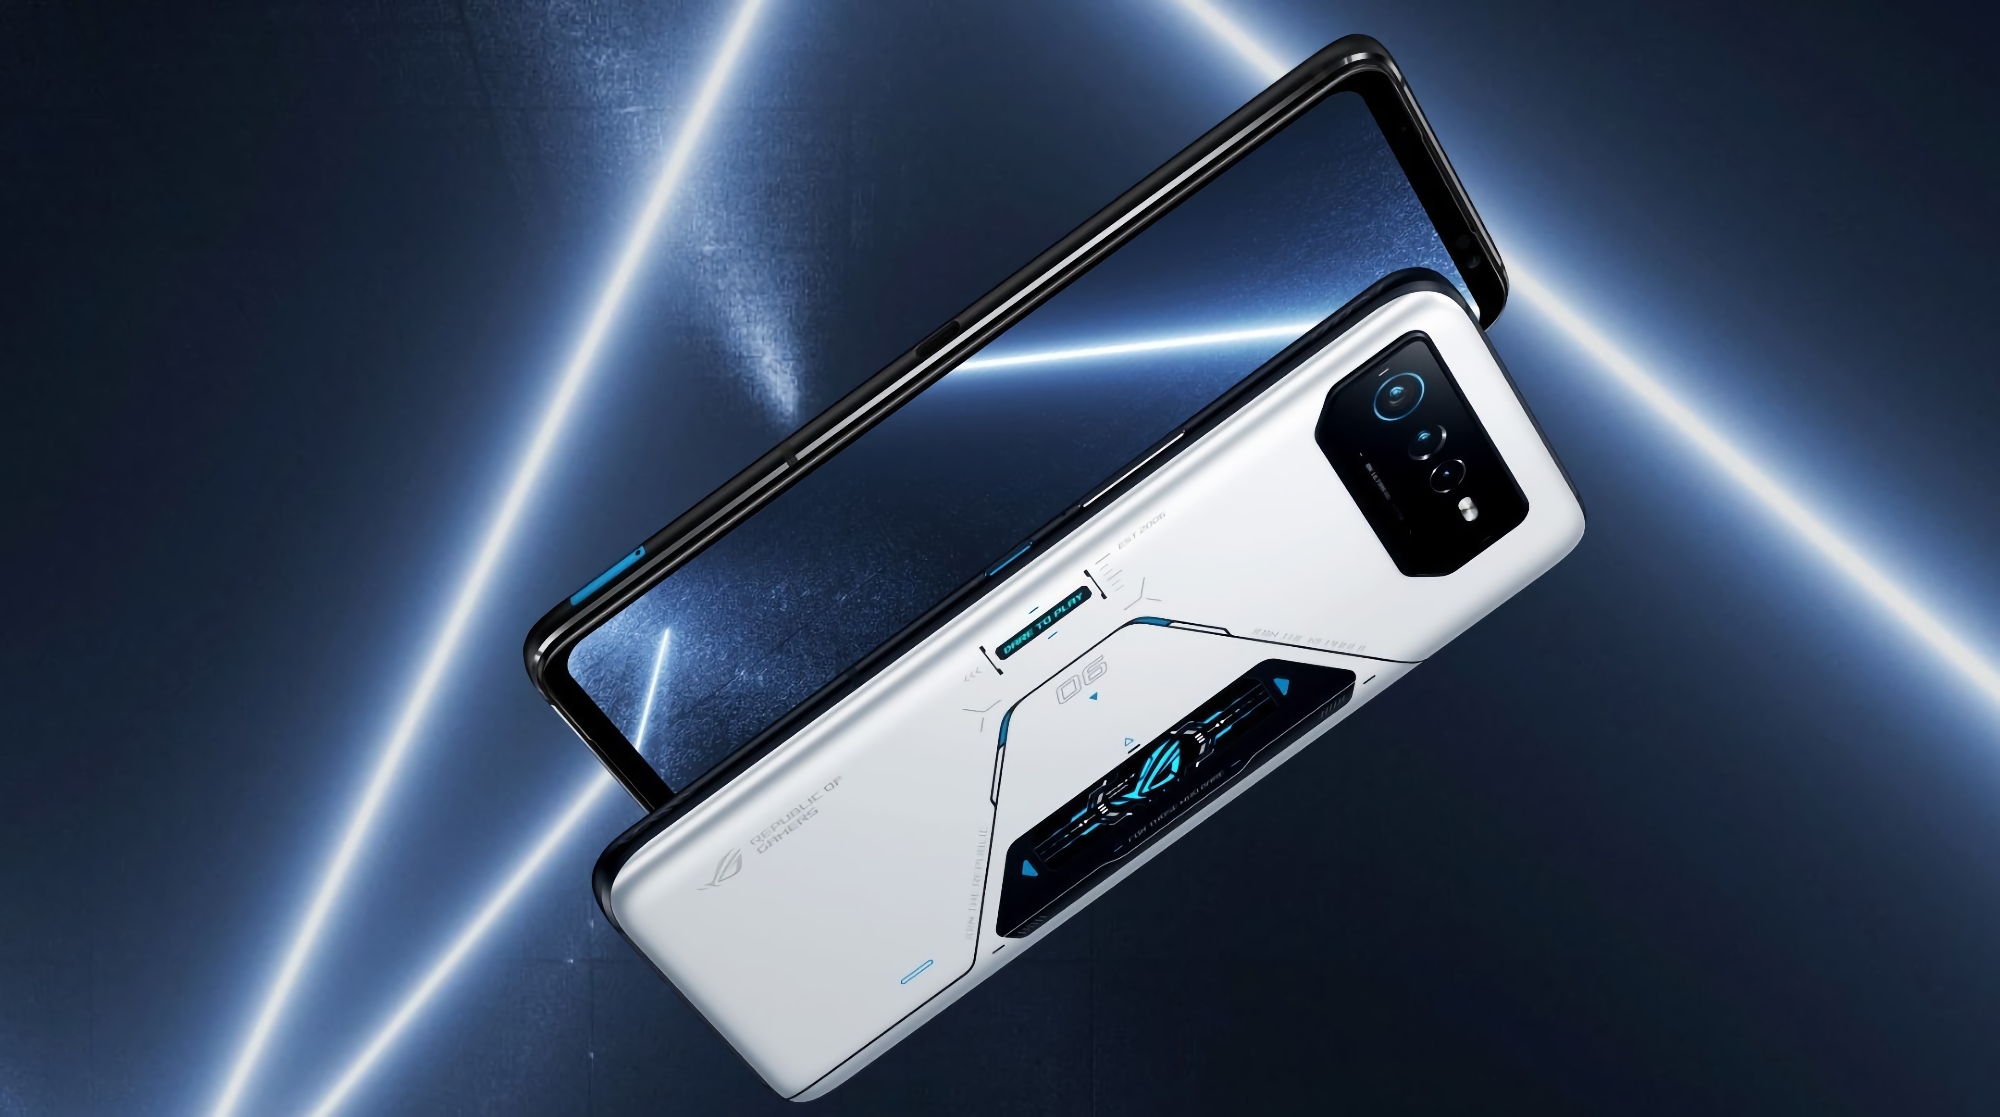 It's official: ASUS ROG Phone 6D with MediaTek Dimensity 9000+ chip will be unveiled on September 19